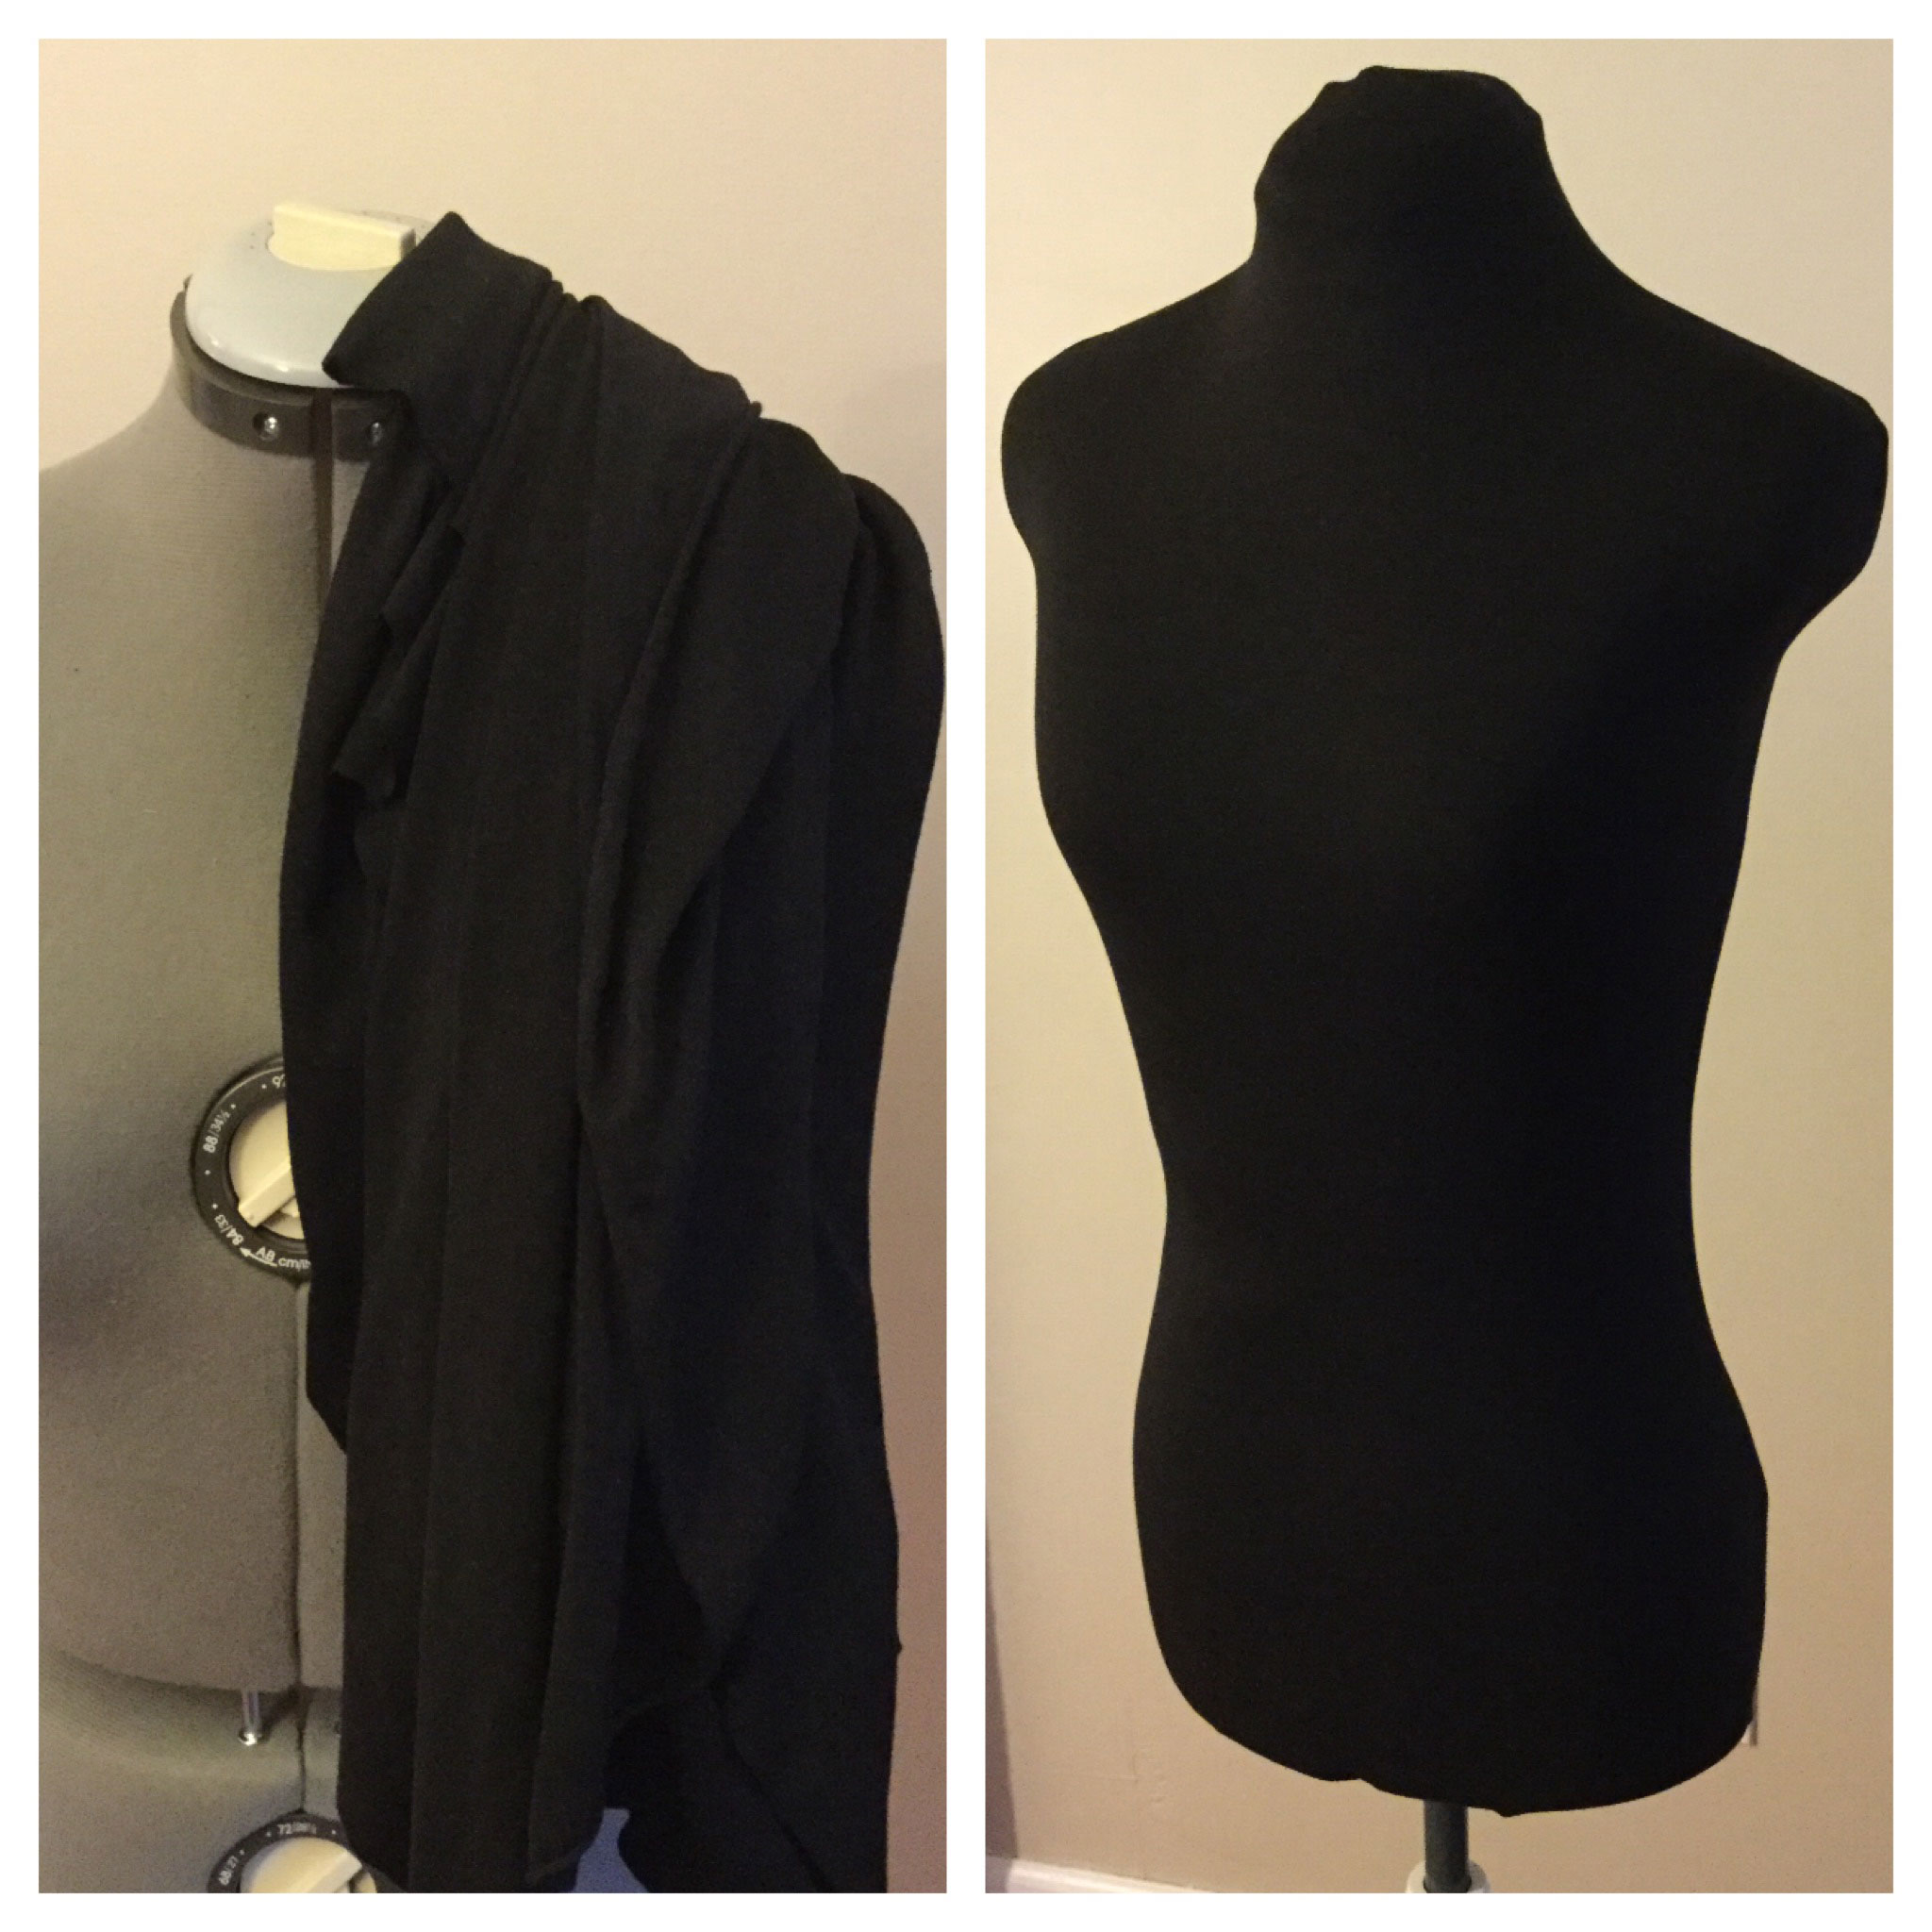 Transform A Dress Form into Display Mannequin Tutorial